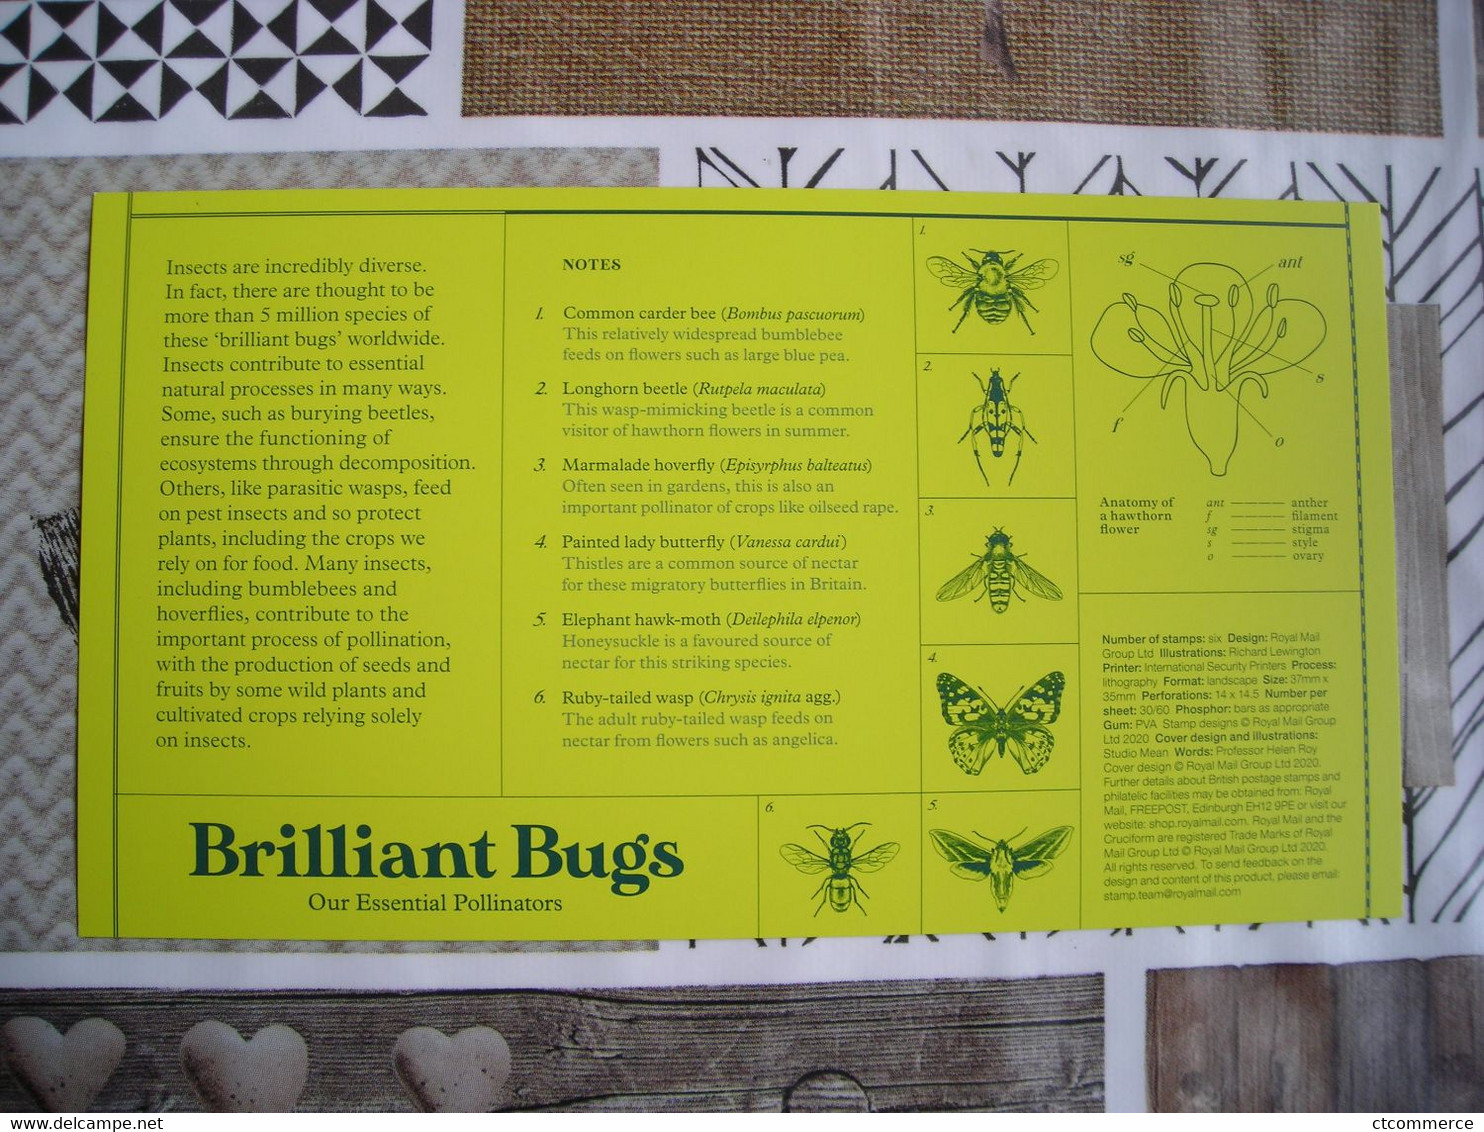 Brilliant Bugs, Common Carder Bee, Abeille - 2011-2020 Decimal Issues